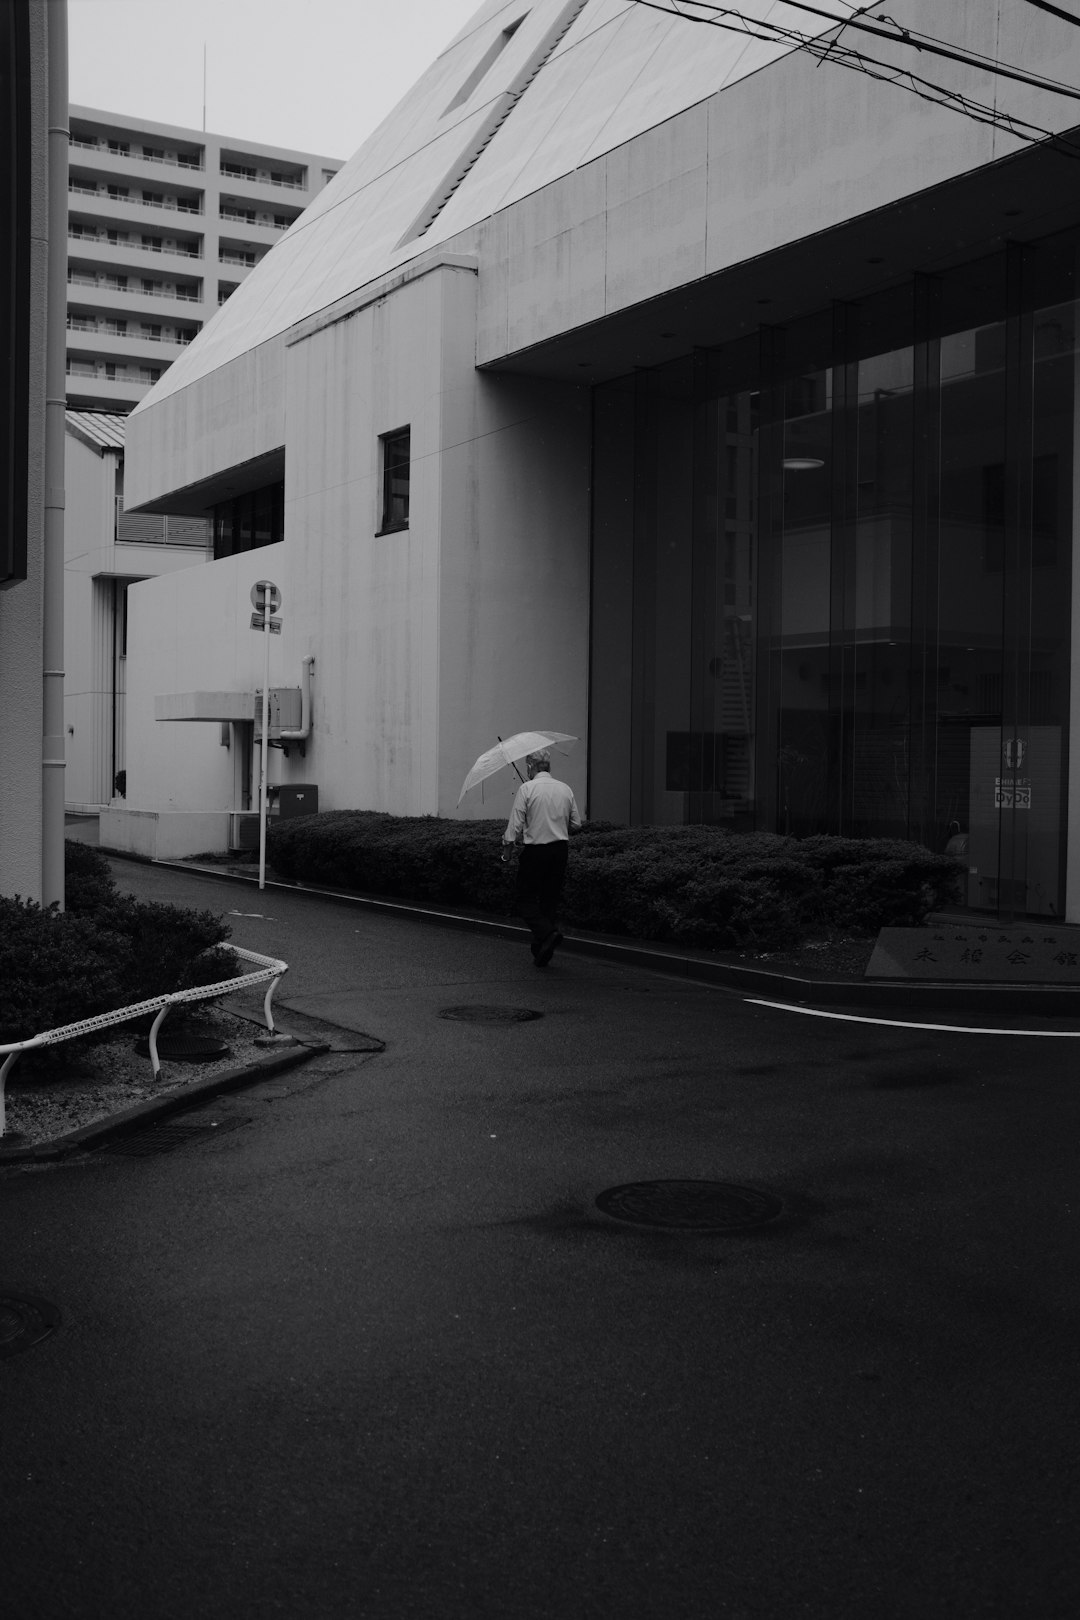 grayscale photo of person holding umbrella walking on street